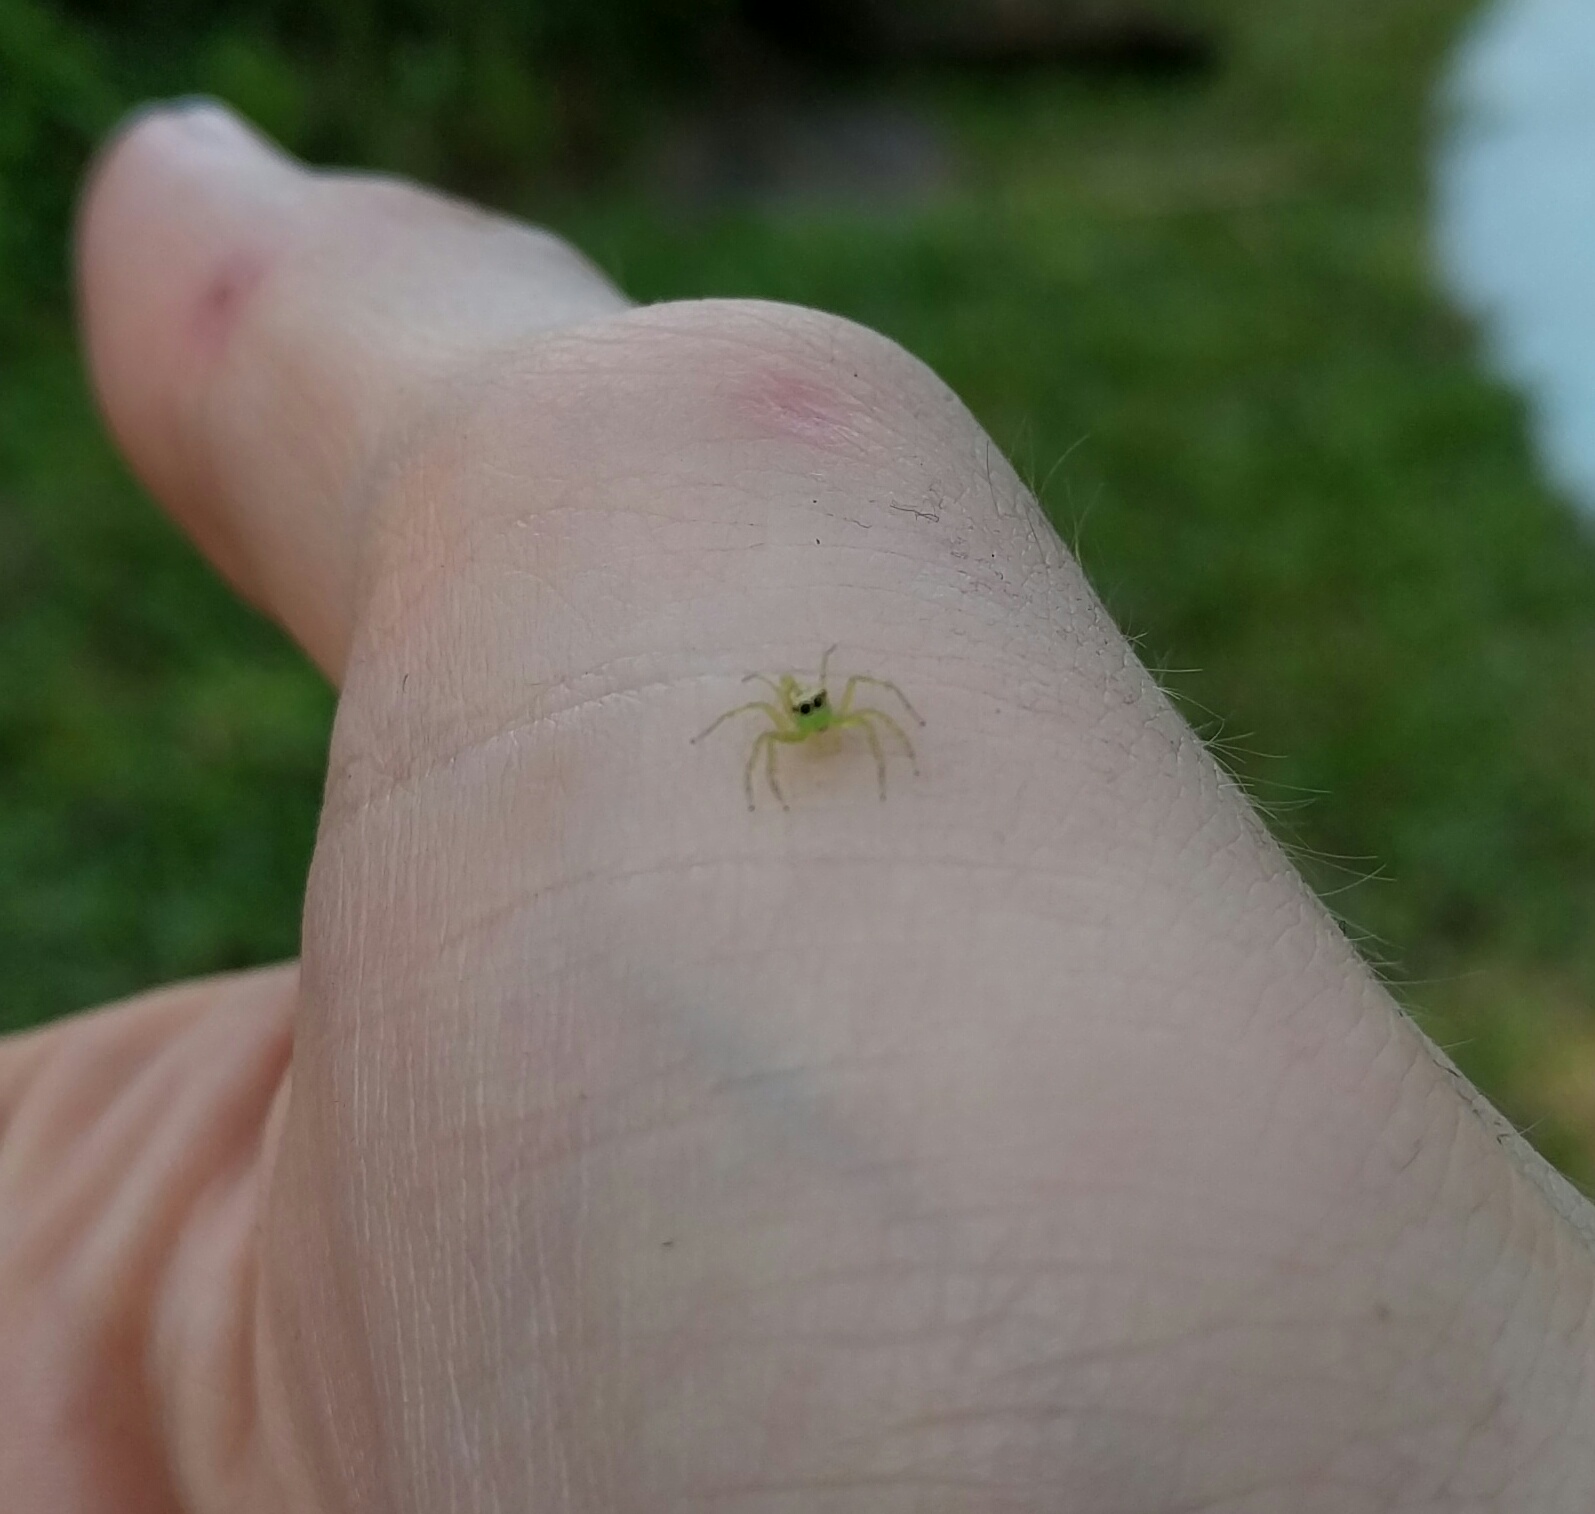 Met a tiny green spider wearing sunnies today : aww